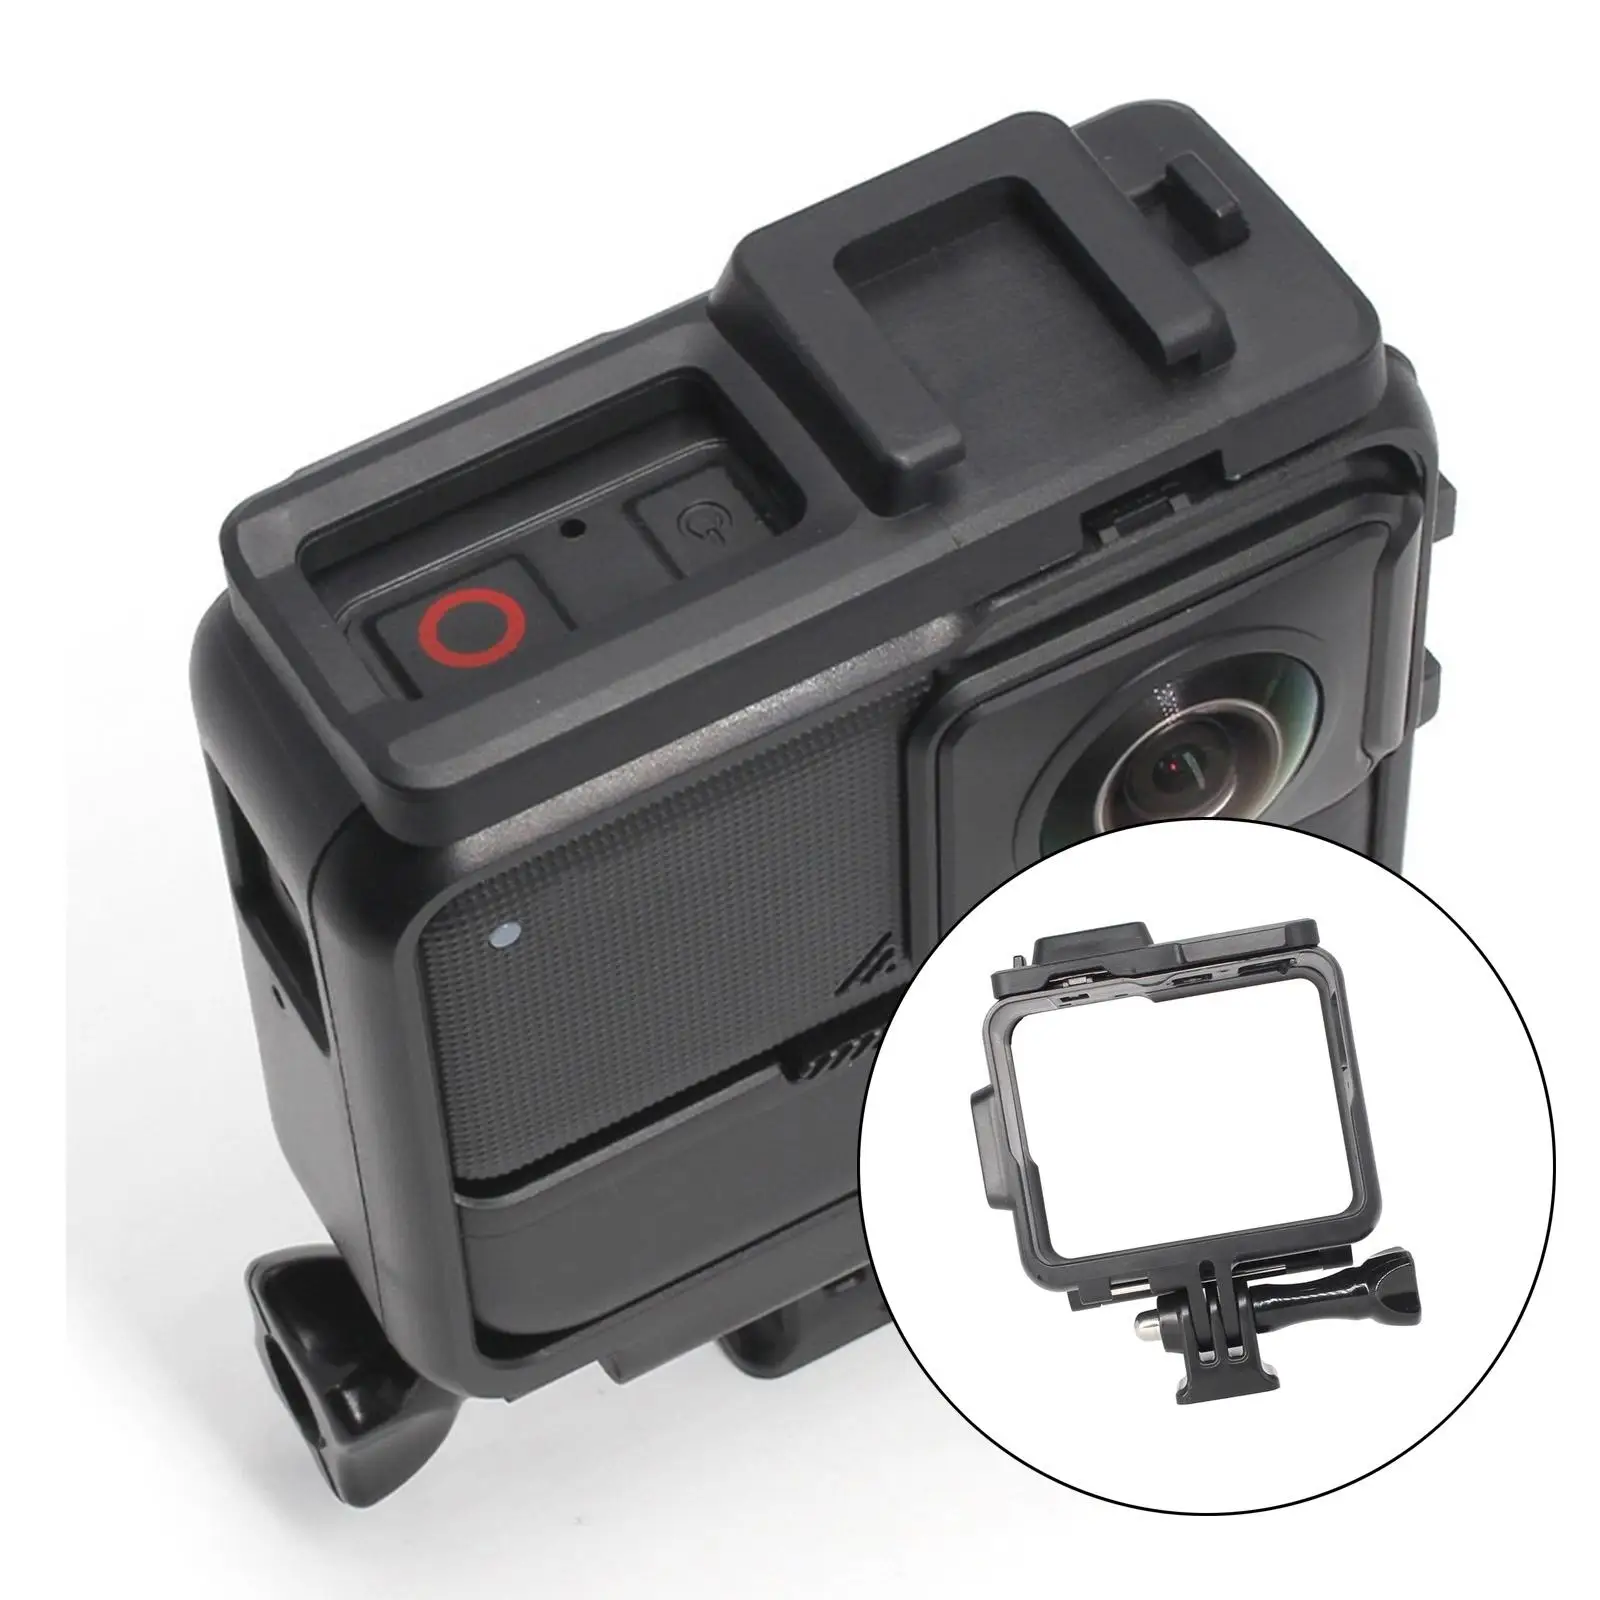 Battery Base Mounting Bracket for Camera Mounts Clamps Camera Photo Accessories